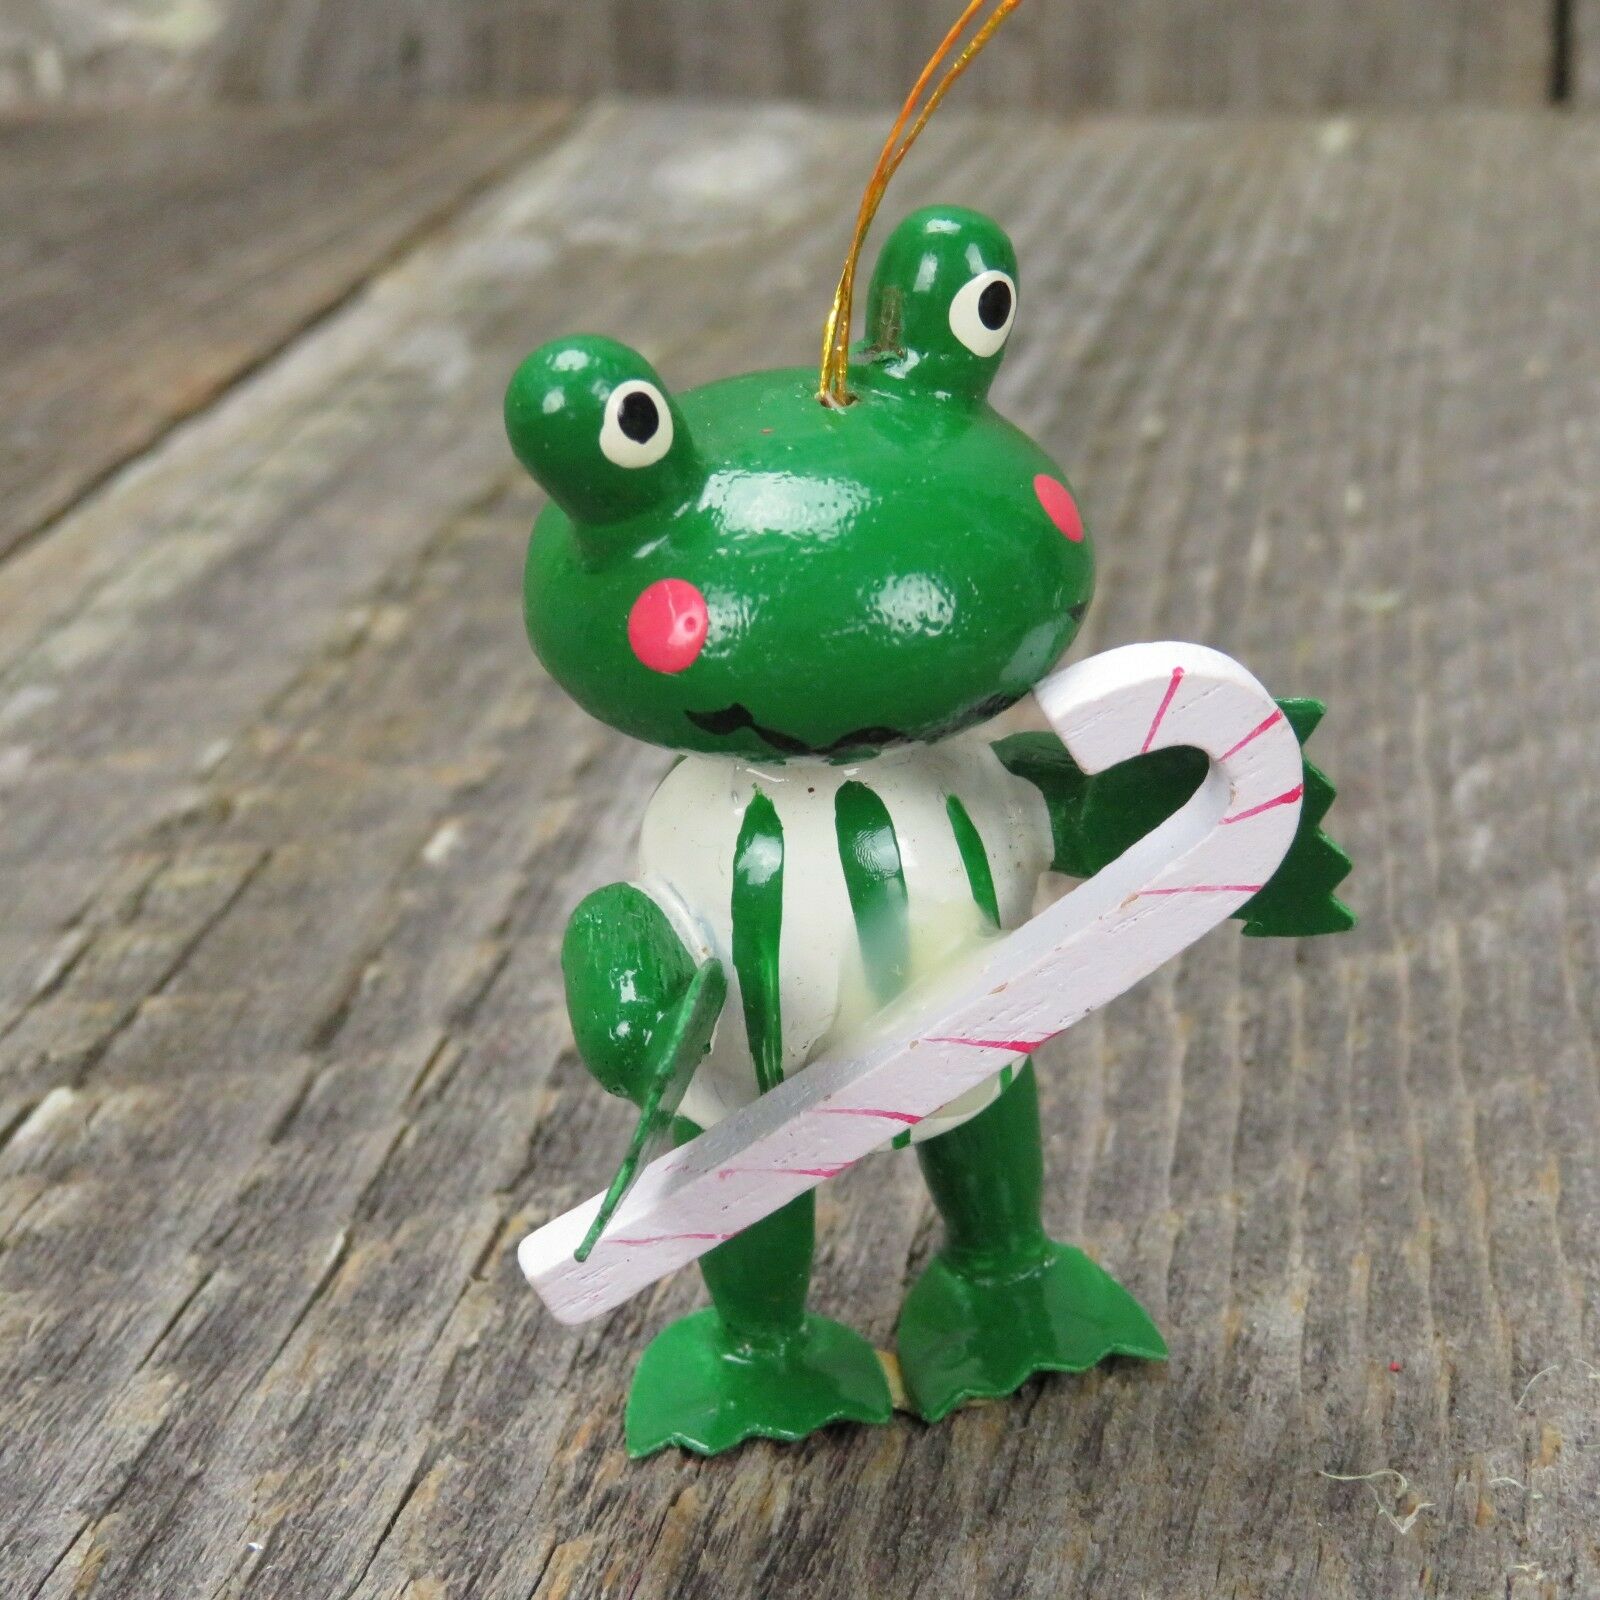 Vintage Frog Toad Ornament Wooden Christmas Wood Green Candy Cane Sled Set - At Grandma's Table